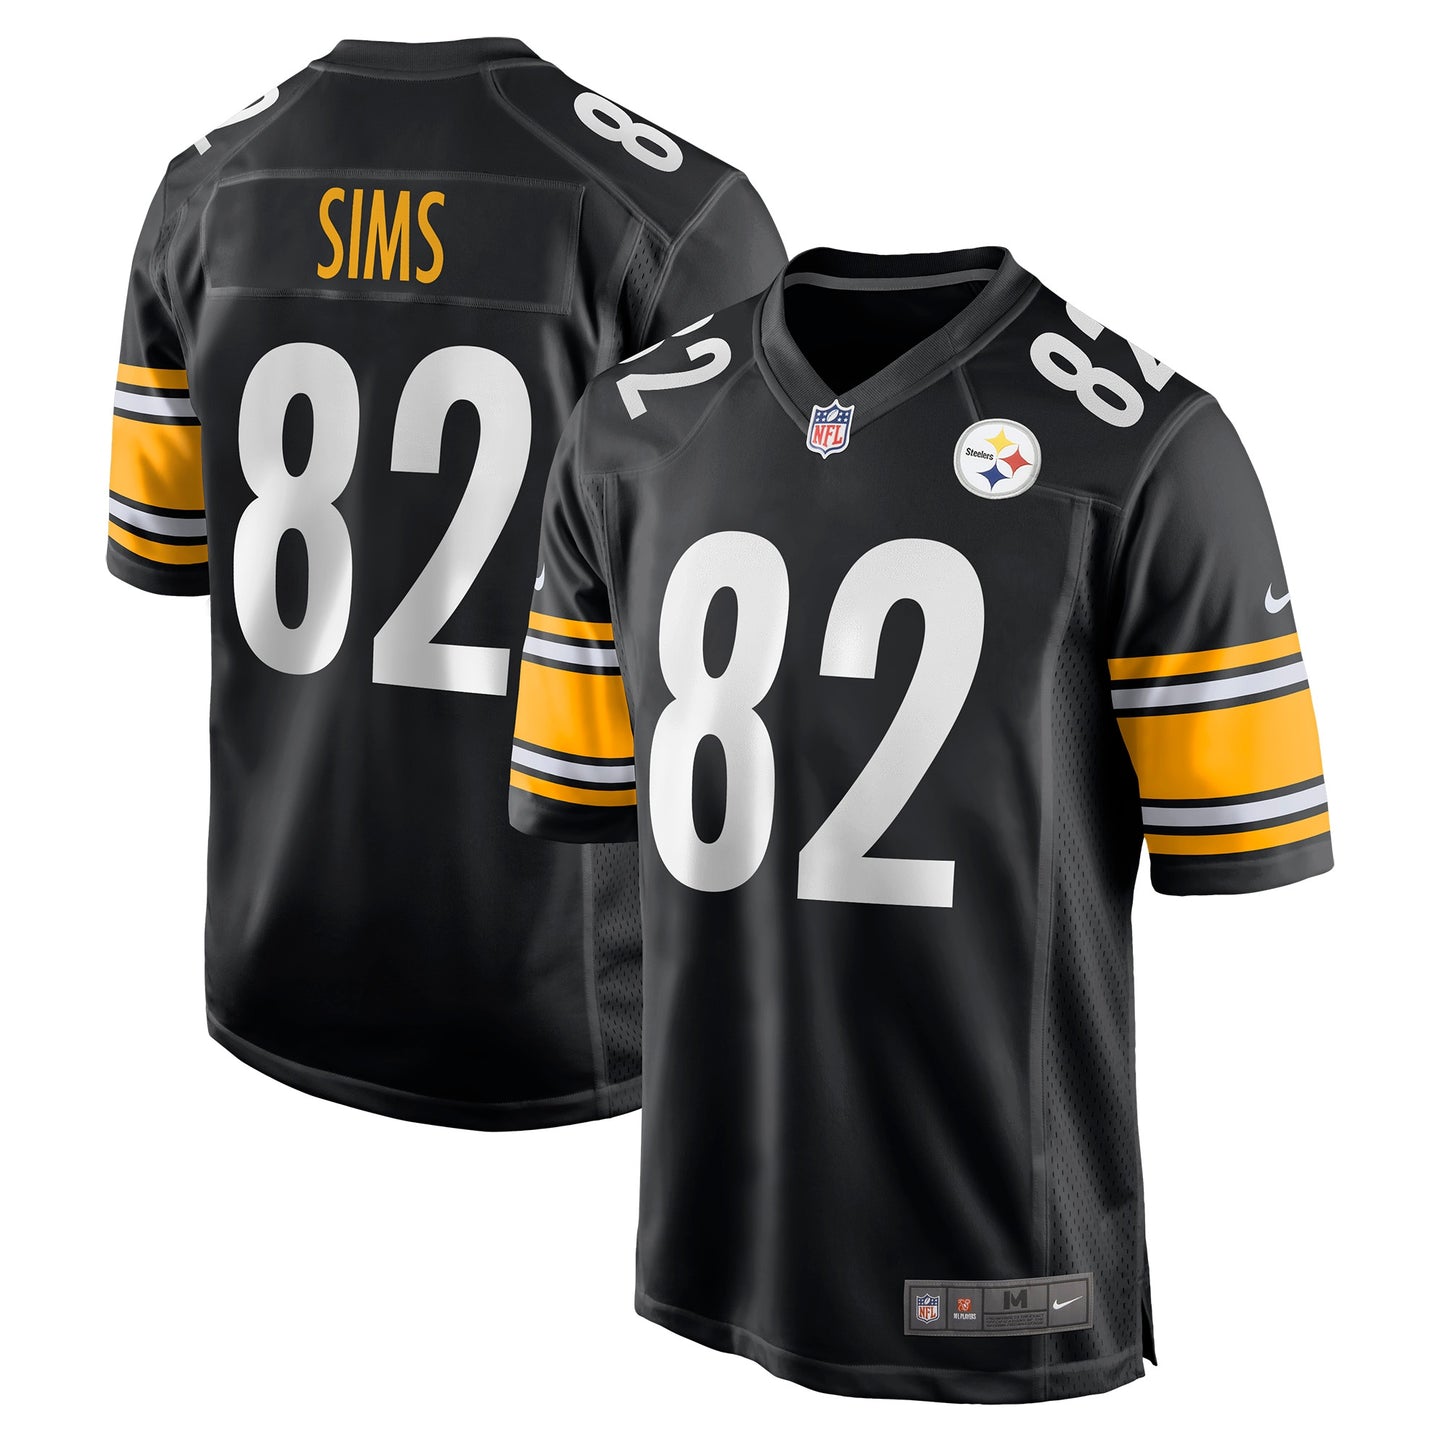 Steven Sims Pittsburgh Steelers Nike Game Jersey - Black